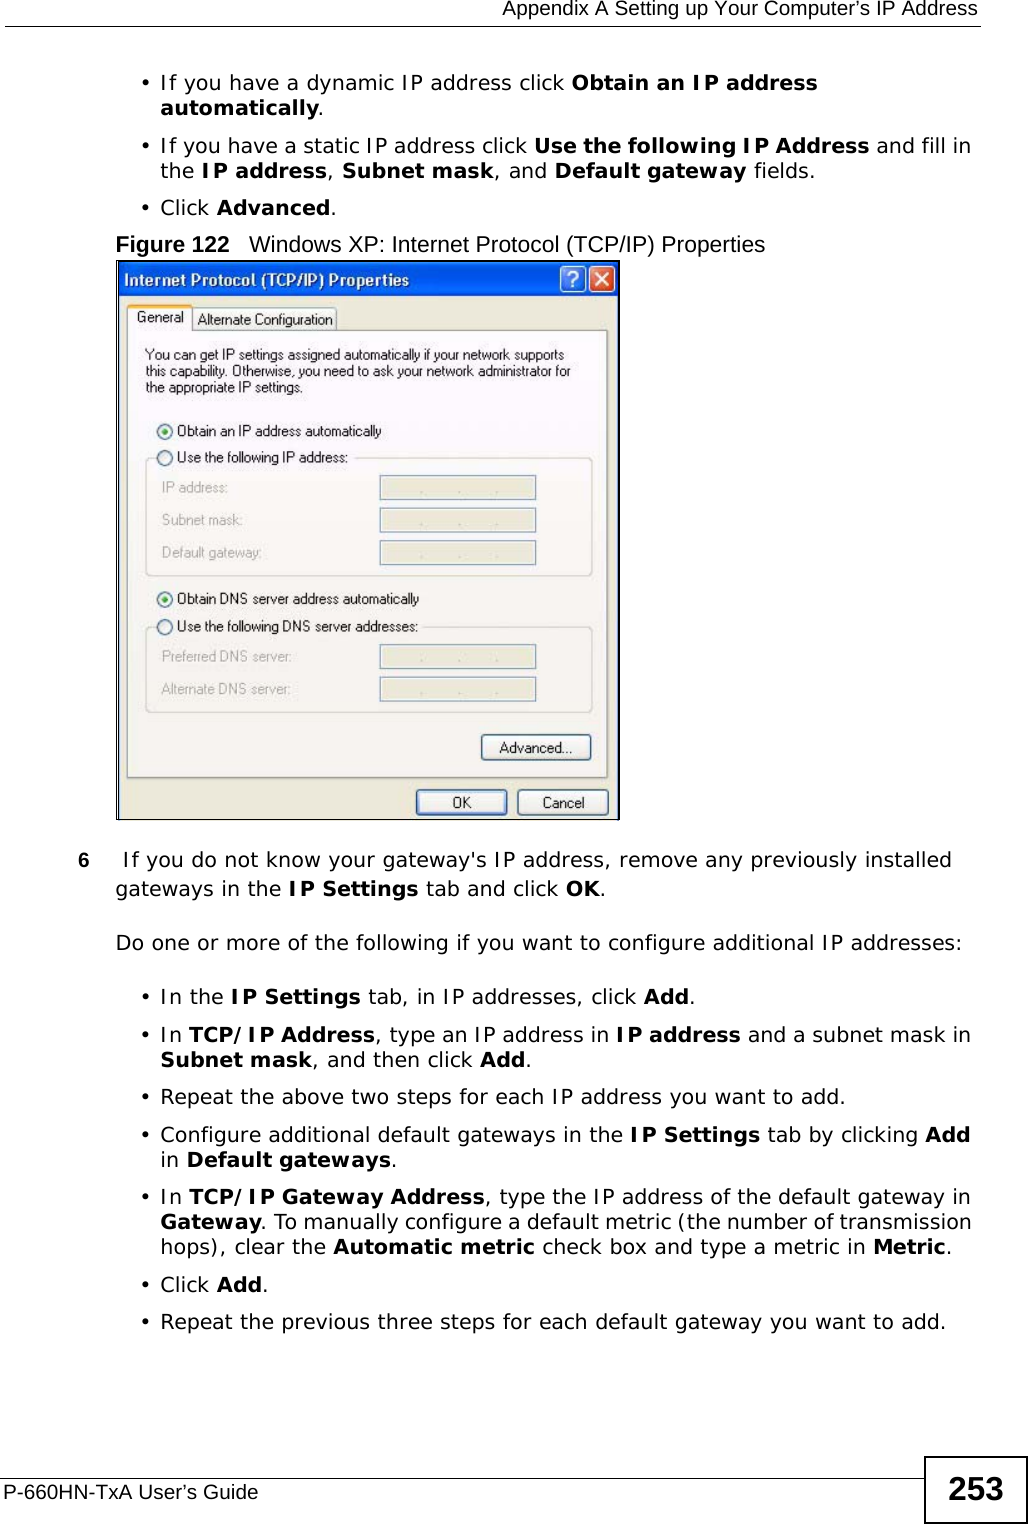  Appendix A Setting up Your Computer’s IP AddressP-660HN-TxA User’s Guide 253• If you have a dynamic IP address click Obtain an IP address automatically.• If you have a static IP address click Use the following IP Address and fill in the IP address, Subnet mask, and Default gateway fields. •Click Advanced.Figure 122   Windows XP: Internet Protocol (TCP/IP) Properties6 If you do not know your gateway&apos;s IP address, remove any previously installed gateways in the IP Settings tab and click OK.Do one or more of the following if you want to configure additional IP addresses:•In the IP Settings tab, in IP addresses, click Add.•In TCP/IP Address, type an IP address in IP address and a subnet mask in Subnet mask, and then click Add.• Repeat the above two steps for each IP address you want to add.• Configure additional default gateways in the IP Settings tab by clicking Add in Default gateways.•In TCP/IP Gateway Address, type the IP address of the default gateway in Gateway. To manually configure a default metric (the number of transmission hops), clear the Automatic metric check box and type a metric in Metric.•Click Add. • Repeat the previous three steps for each default gateway you want to add.